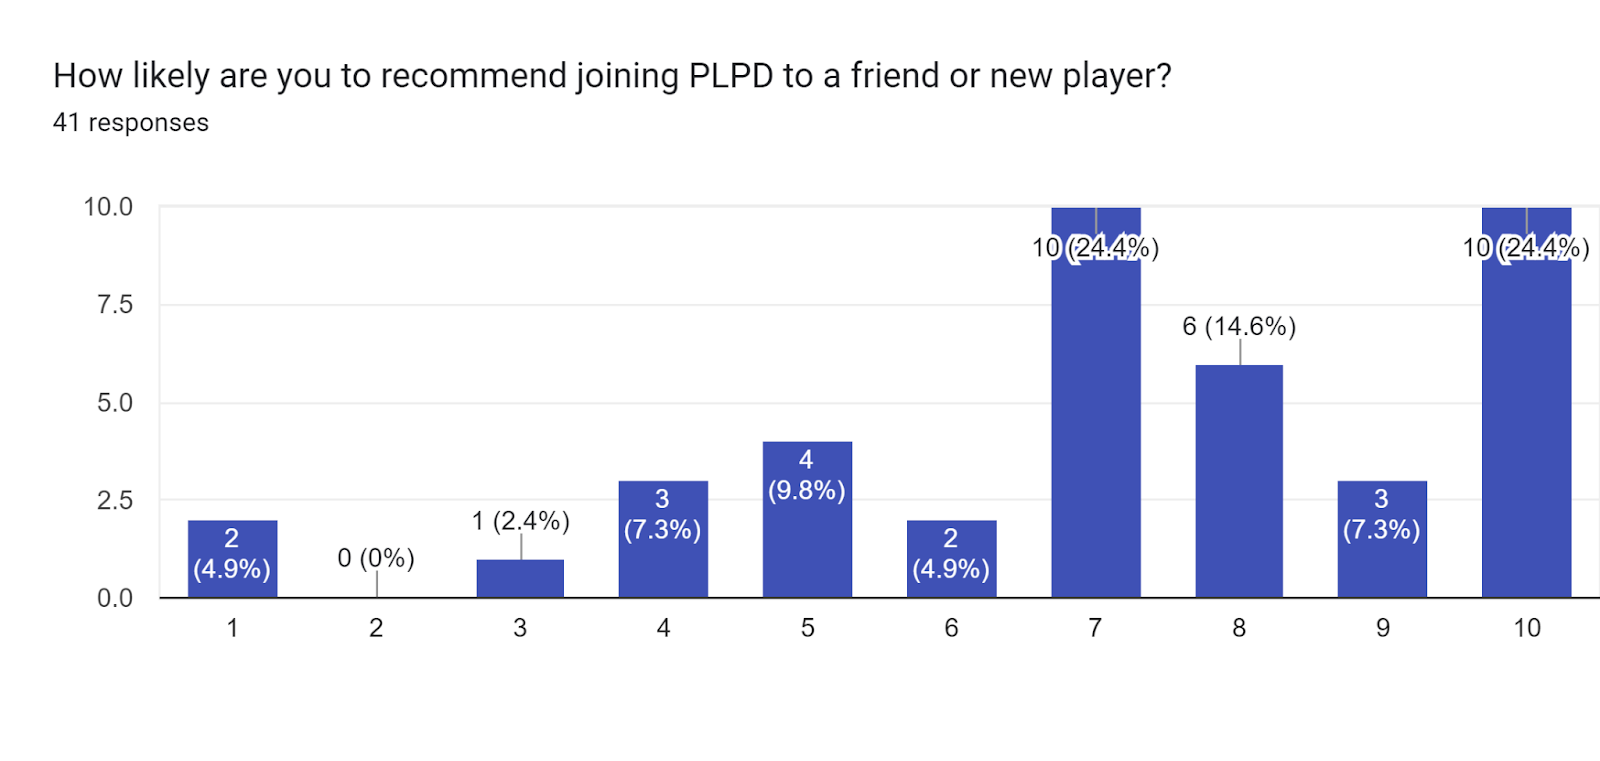 Forms response chart. Question title: How likely are you to recommend joining PLPD to a friend or new player?. Number of responses: 41 responses.